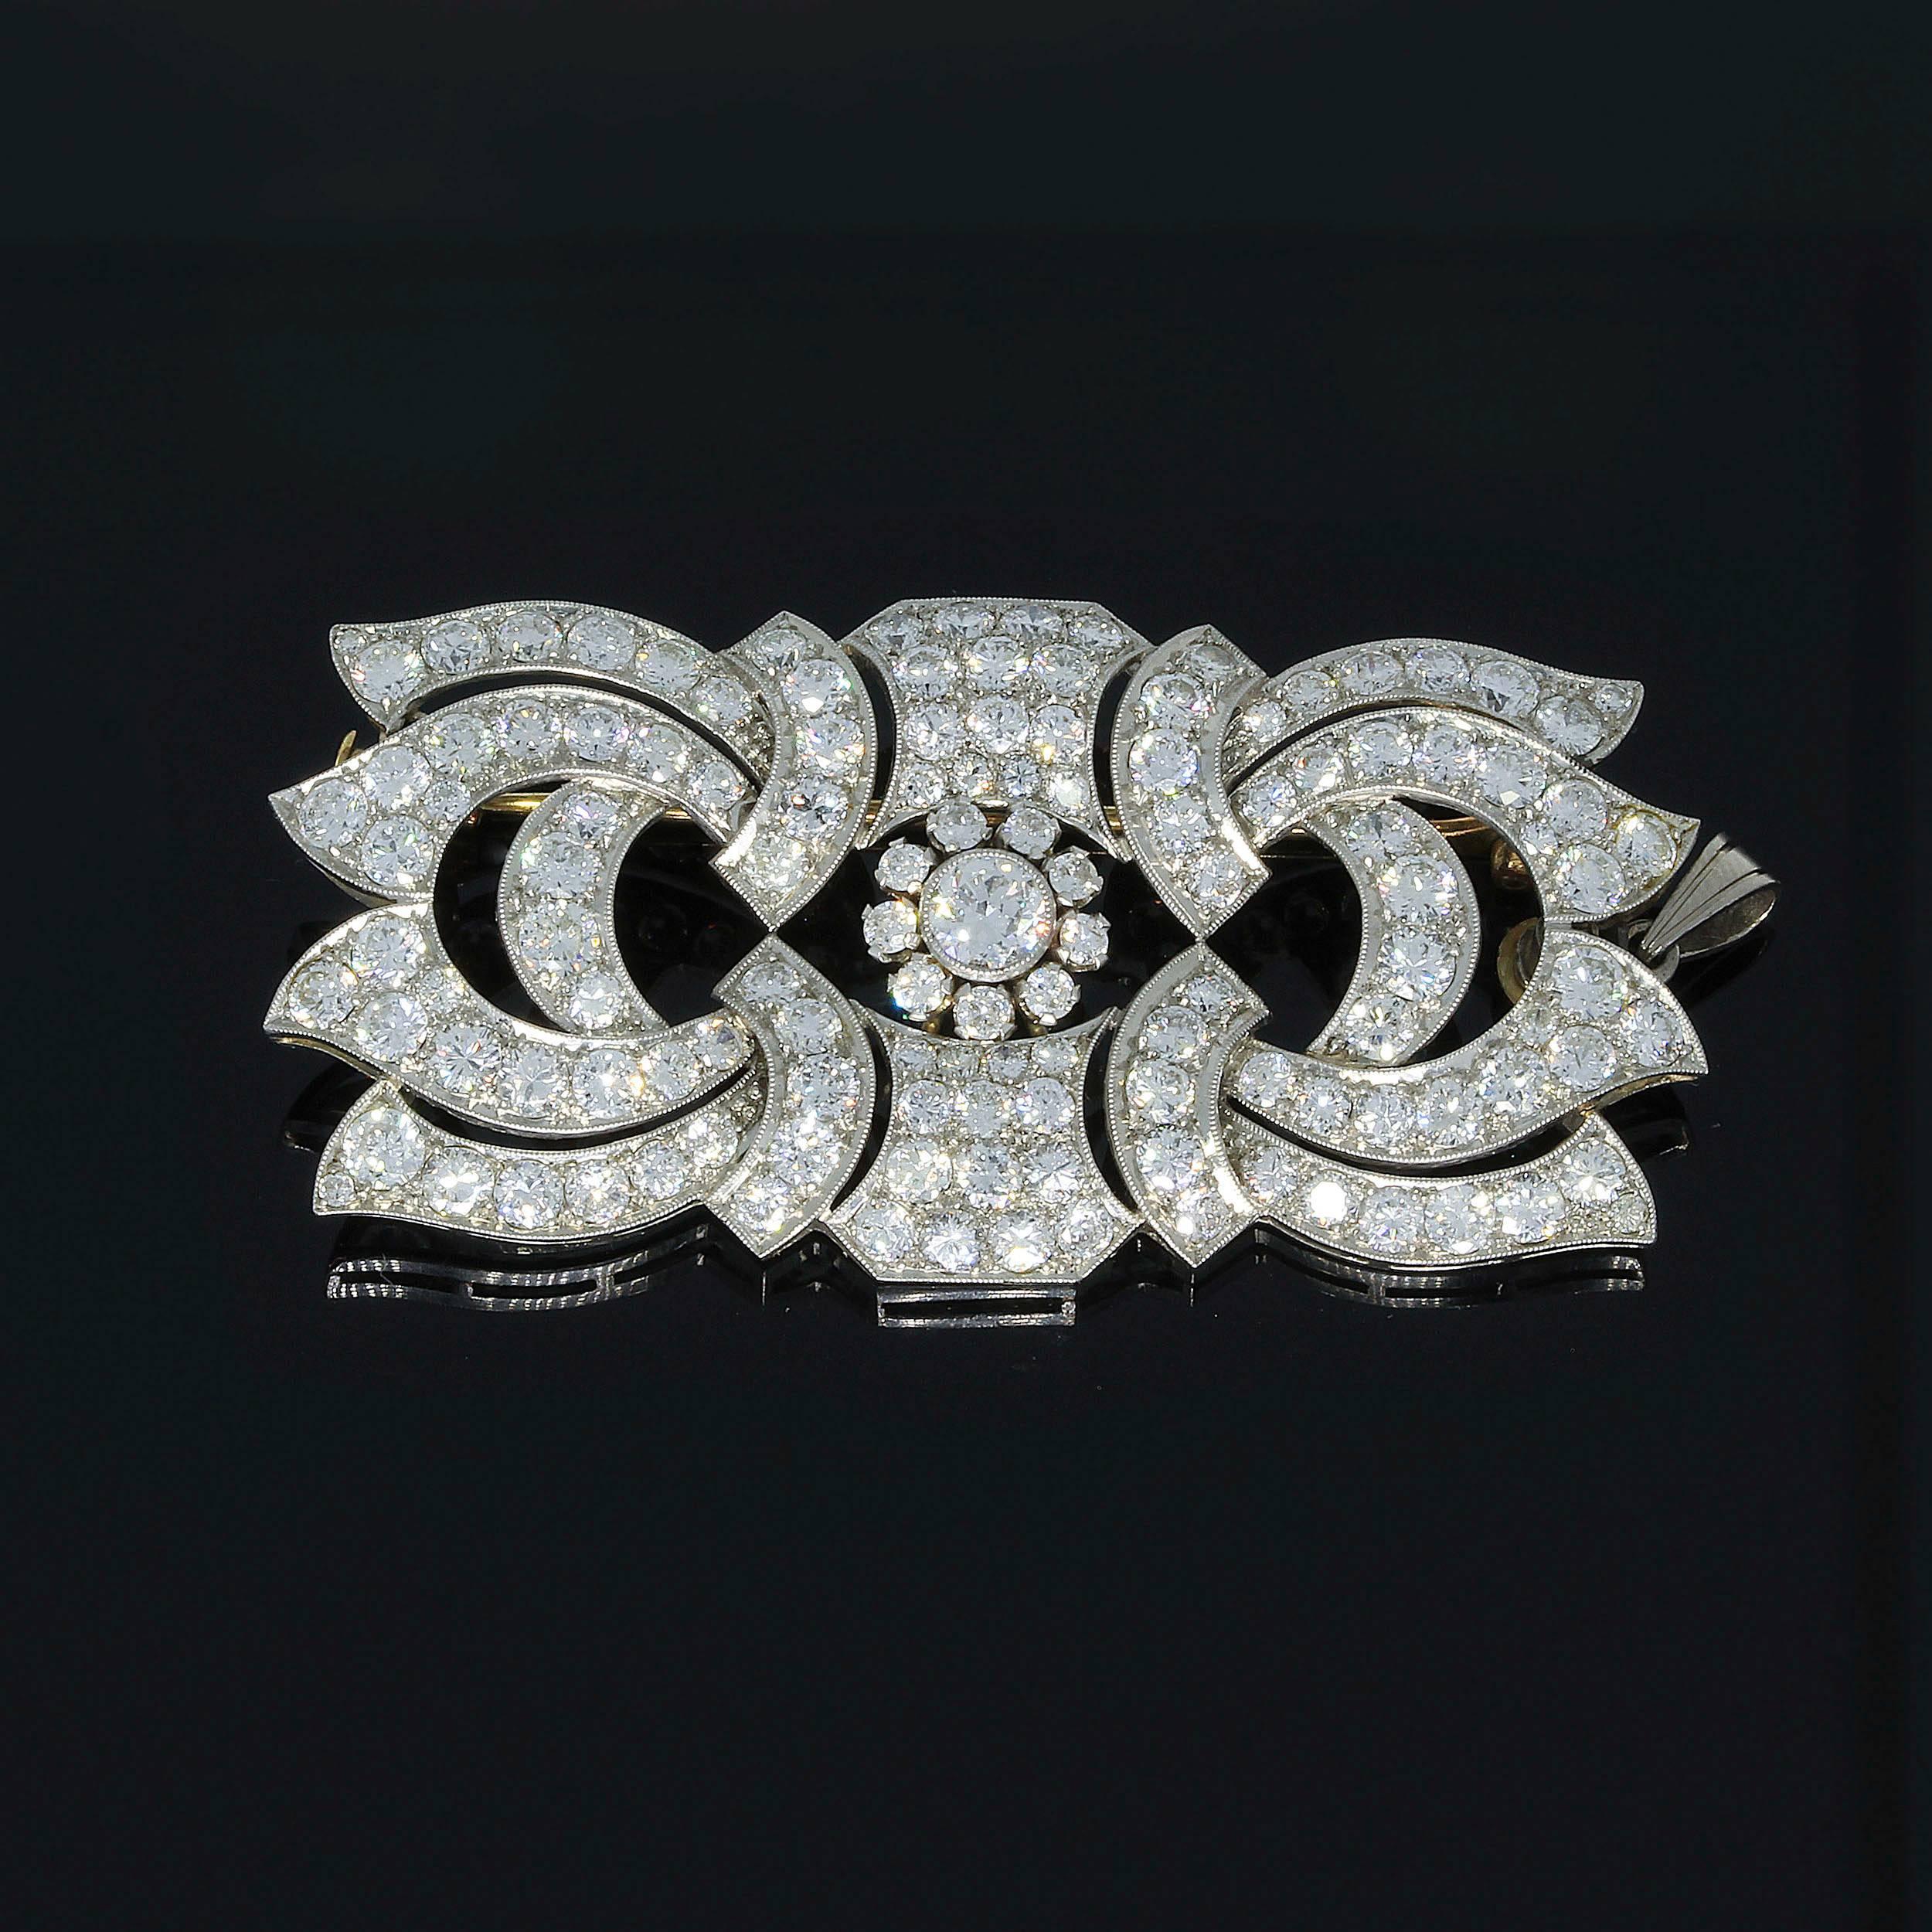 Art Deco brooch/pendant, Germany ca. 1920's with 128 brilliant-cut diamonds weighing approximately 10,5 carat, 
clarity: VVS-VS, color: G ( fine white ). Mounted in 18K white gold. Millegrain setting. Rhodanized. Total weight: 18,2 g. Length: 2.4 in